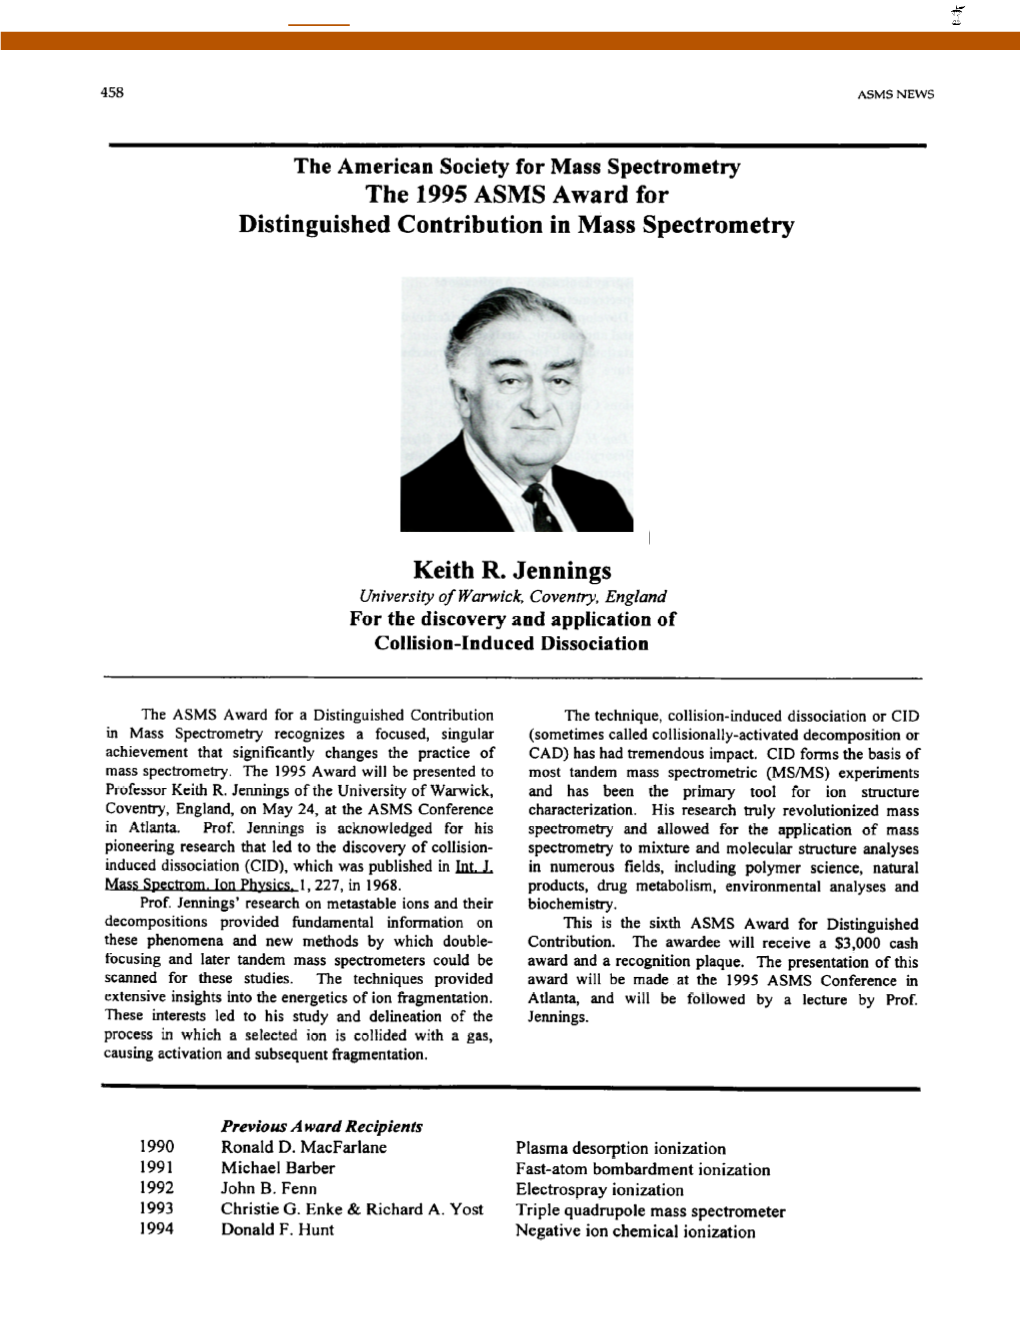 The 1995 ASMS Award for Distinguished Contribution in Mass Spectrometry